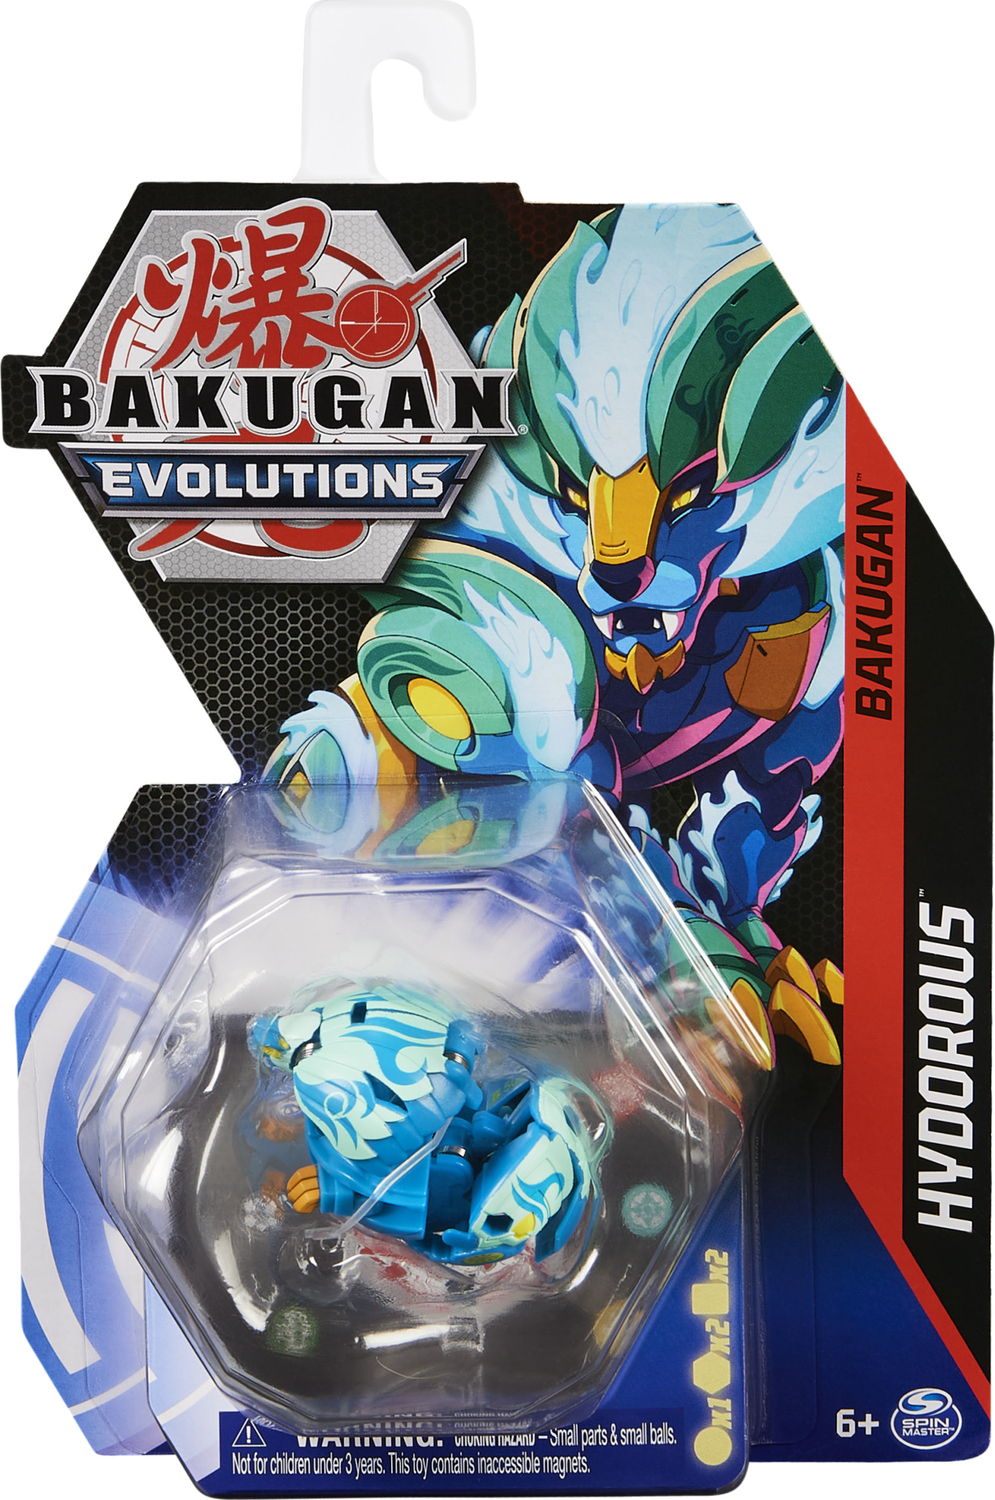 Bakugan Battle Arena, Game Board Collectibles, for Ages 6 and Up (Edition  May Vary)